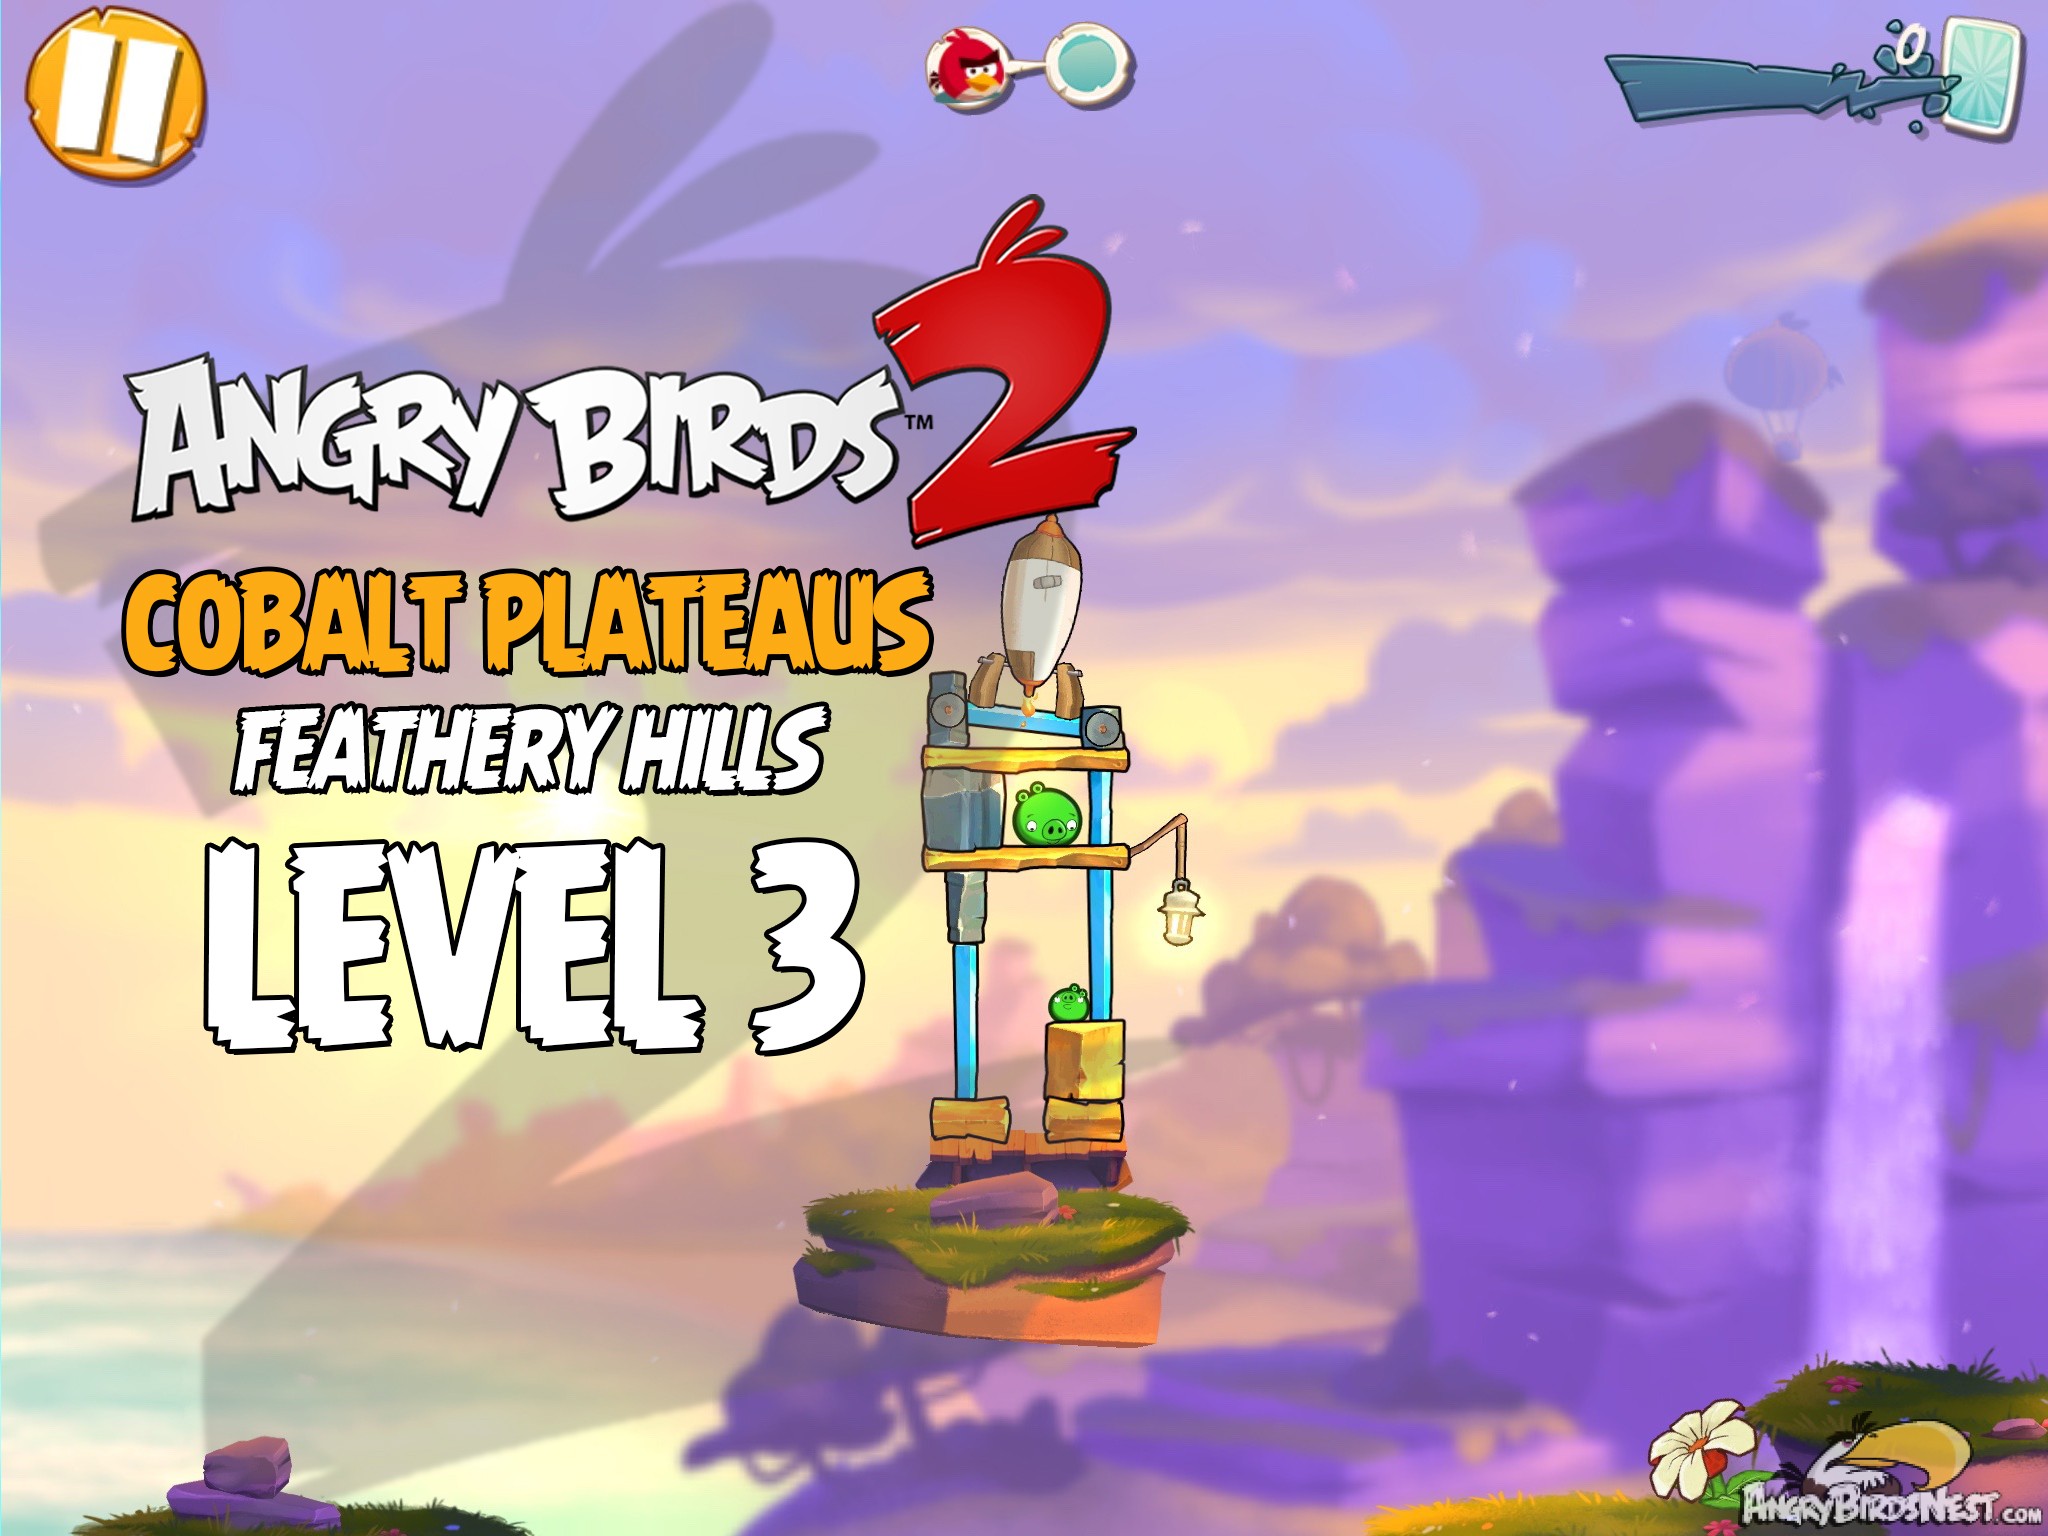 Angry Birds 2 Cobalt Plateaus Feathery Hills Level 3